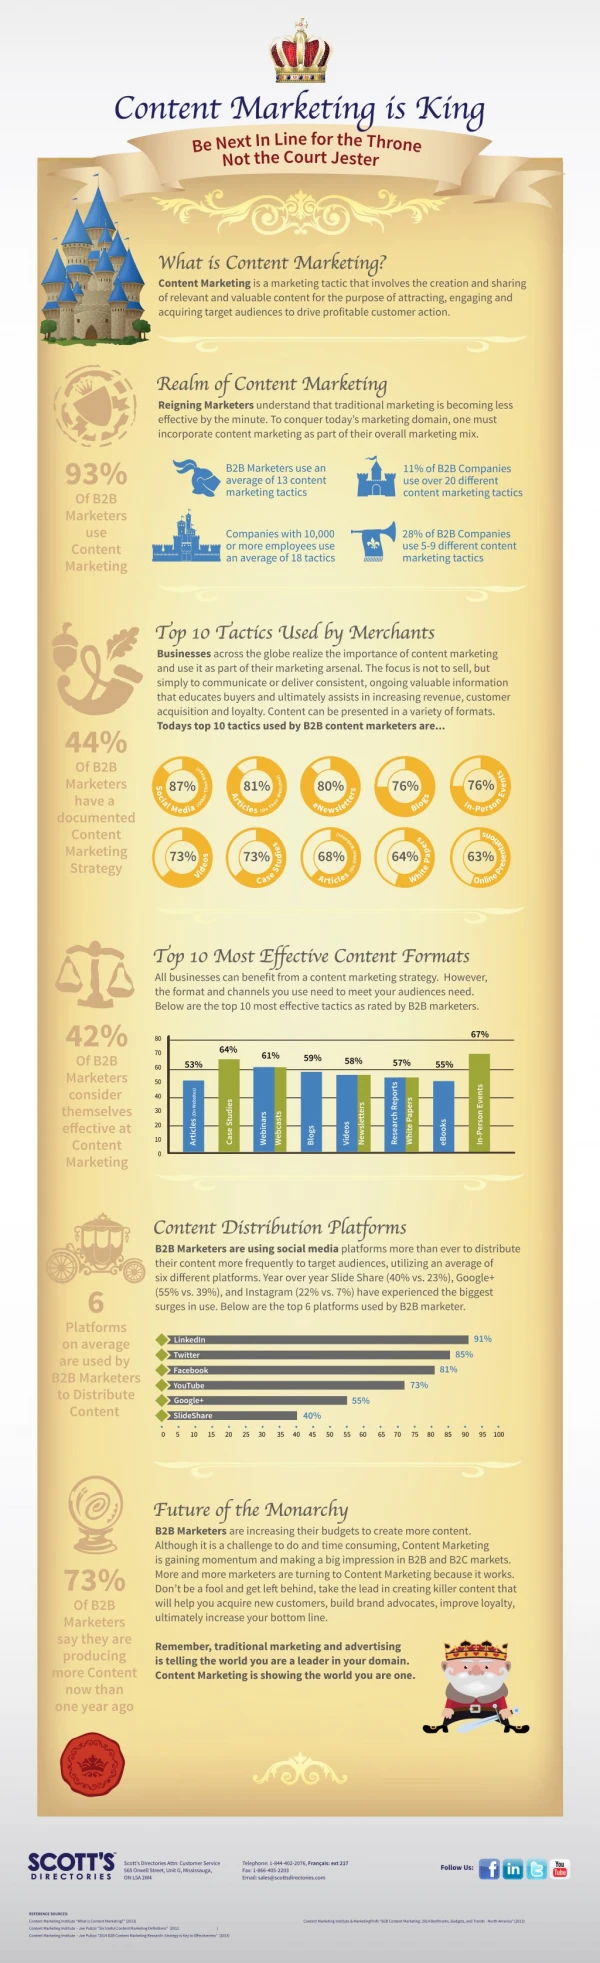 Realm of Content Marketing